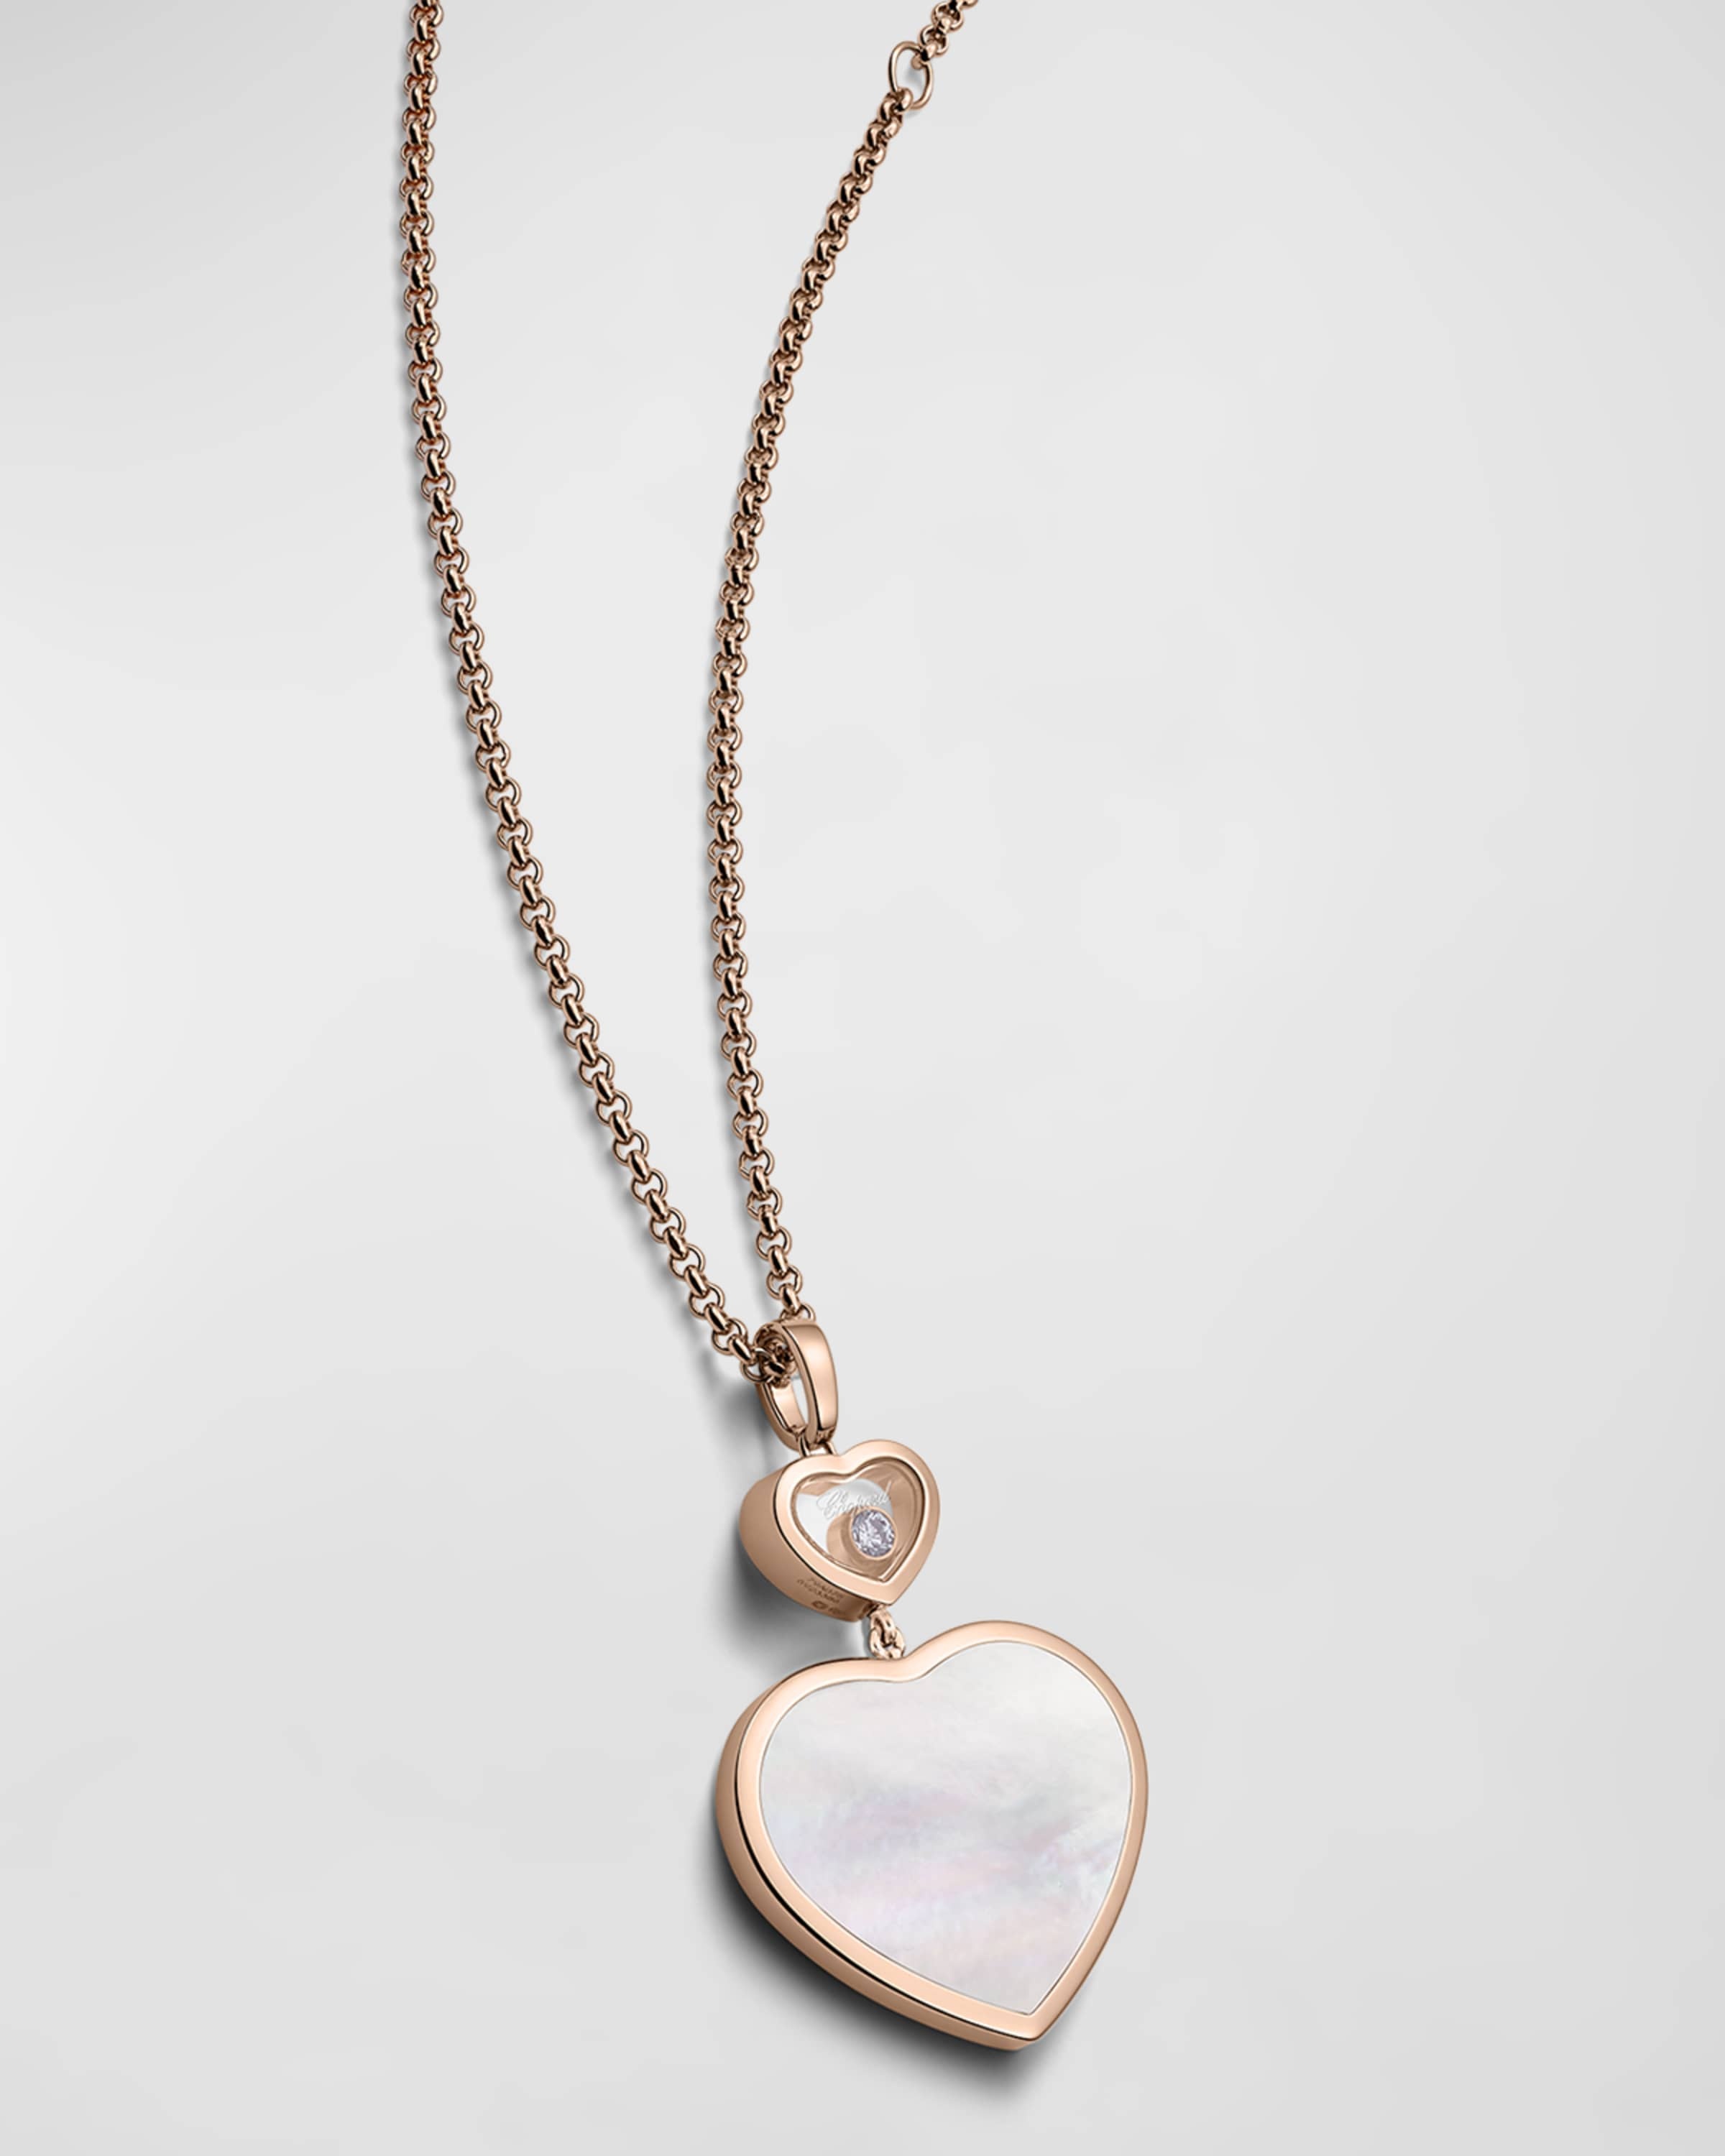 Happy Hearts 18K Rose Gold & Mother-of-Pearl Necklace with Diamond - 3